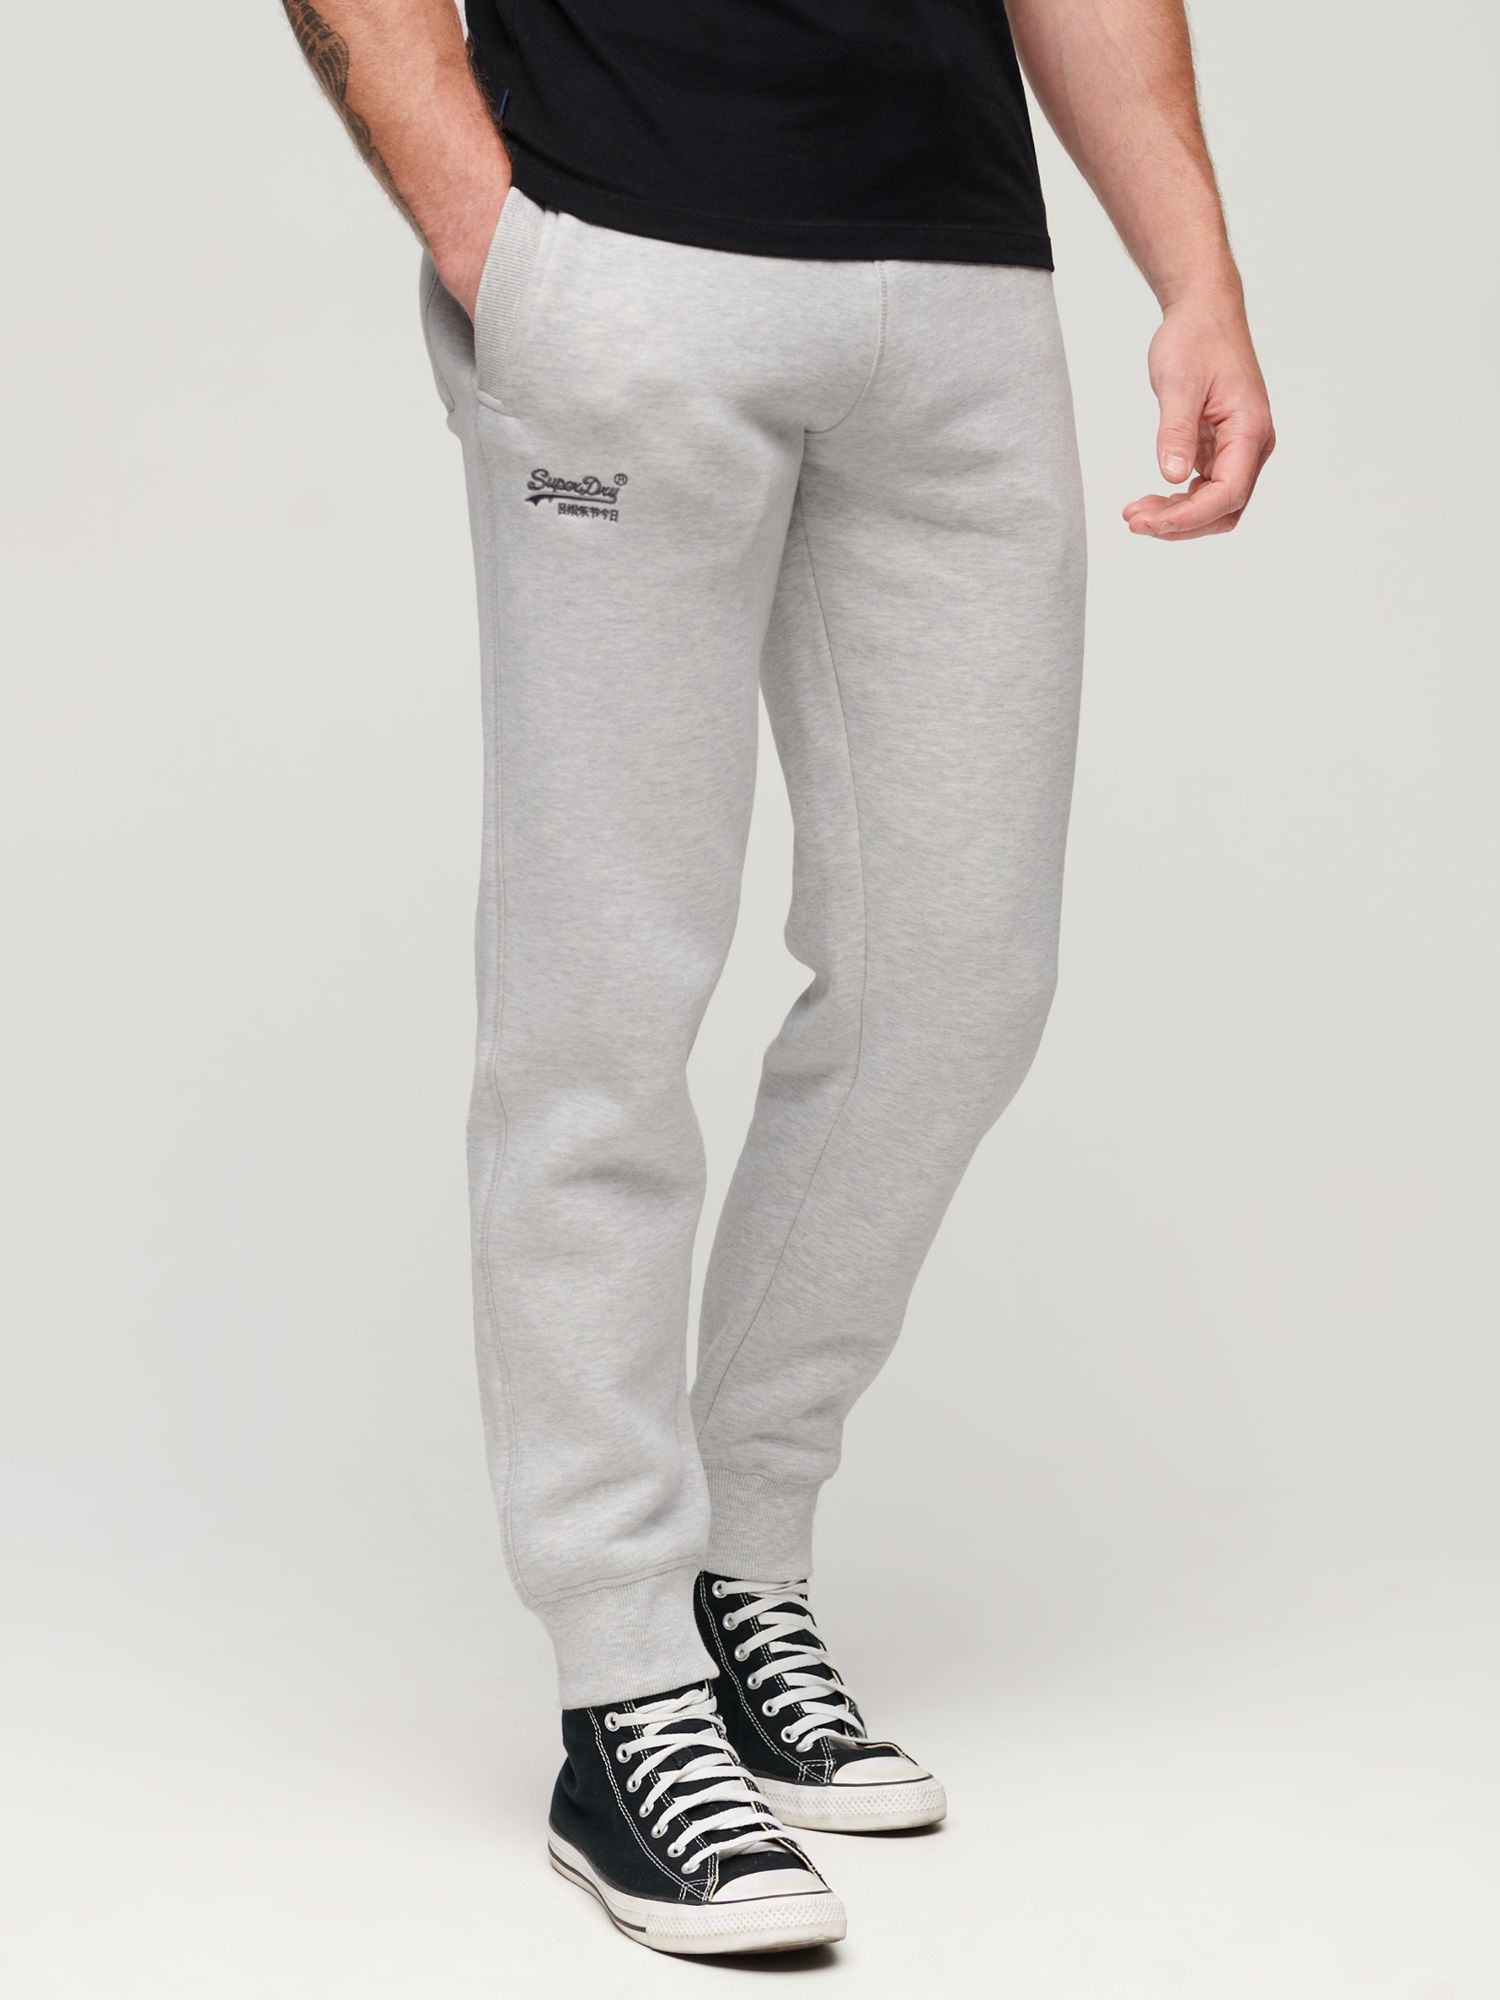 Buy Charcoal Grey Open Hem Joggers from the Next UK online shop